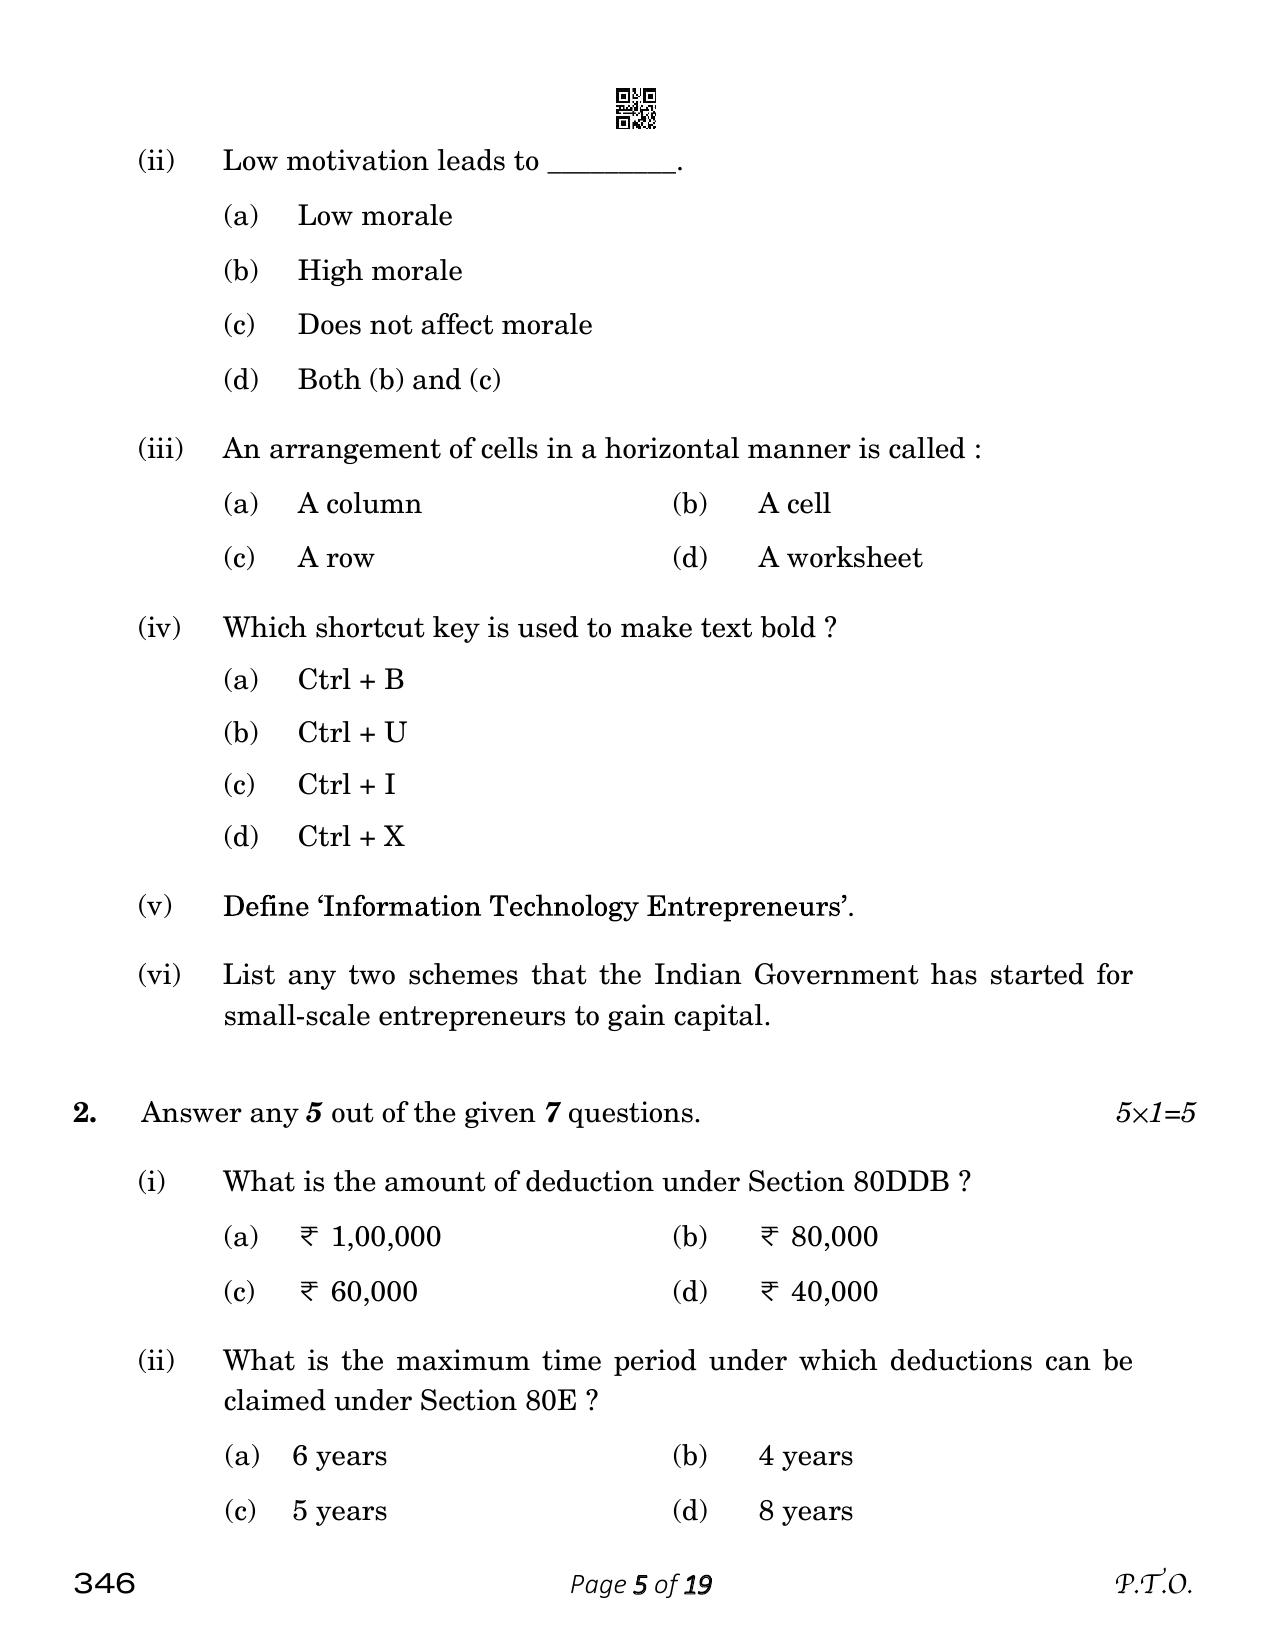 CBSE Class 12 Taxation (Compartment) 2023 Question Paper - Page 5